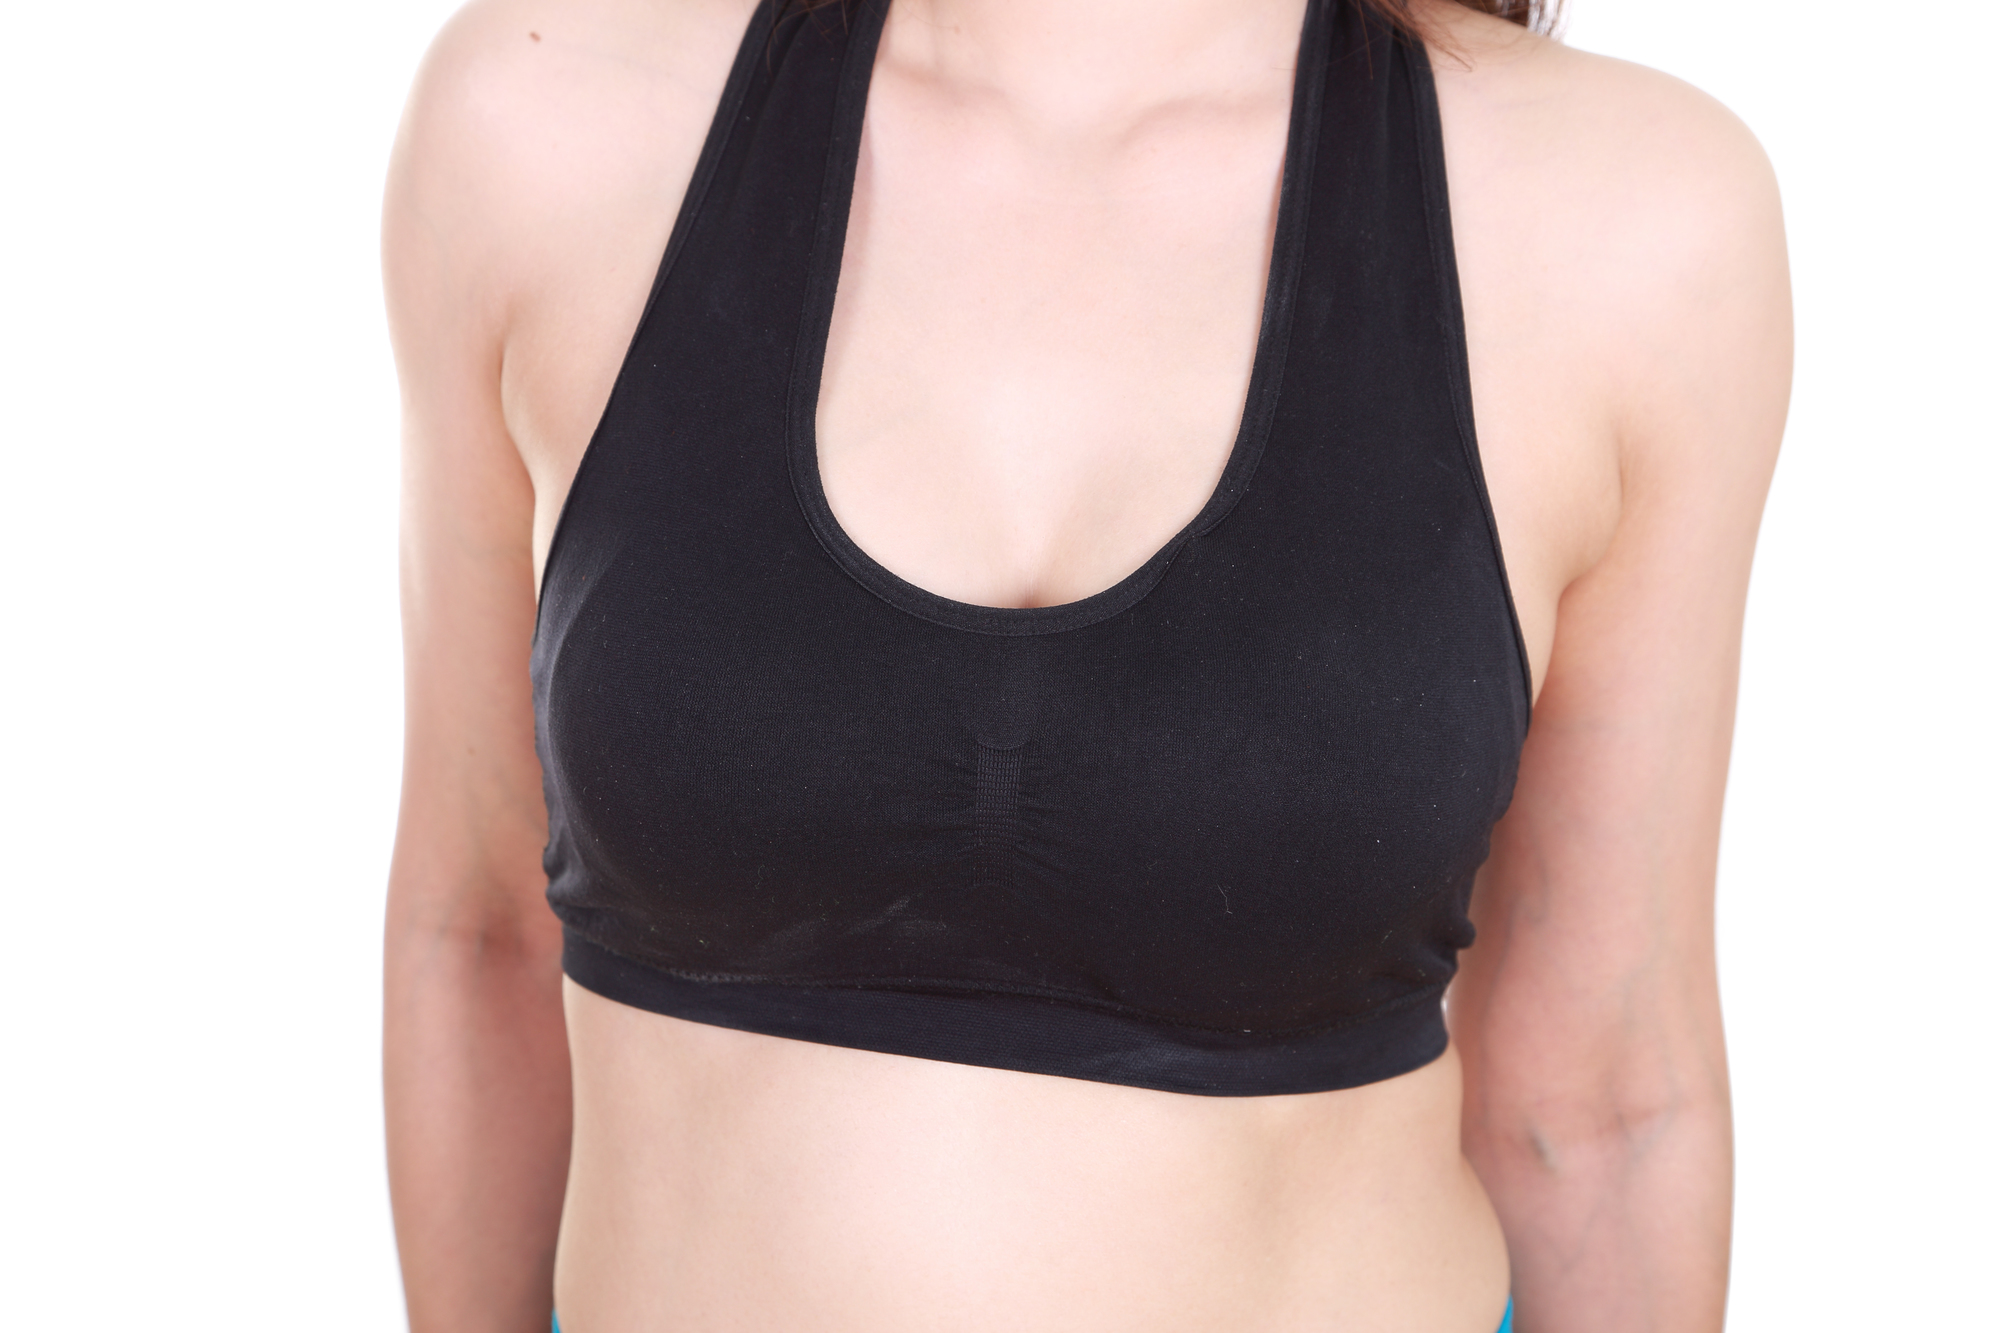 close up of a woman's chest in her sports bra.